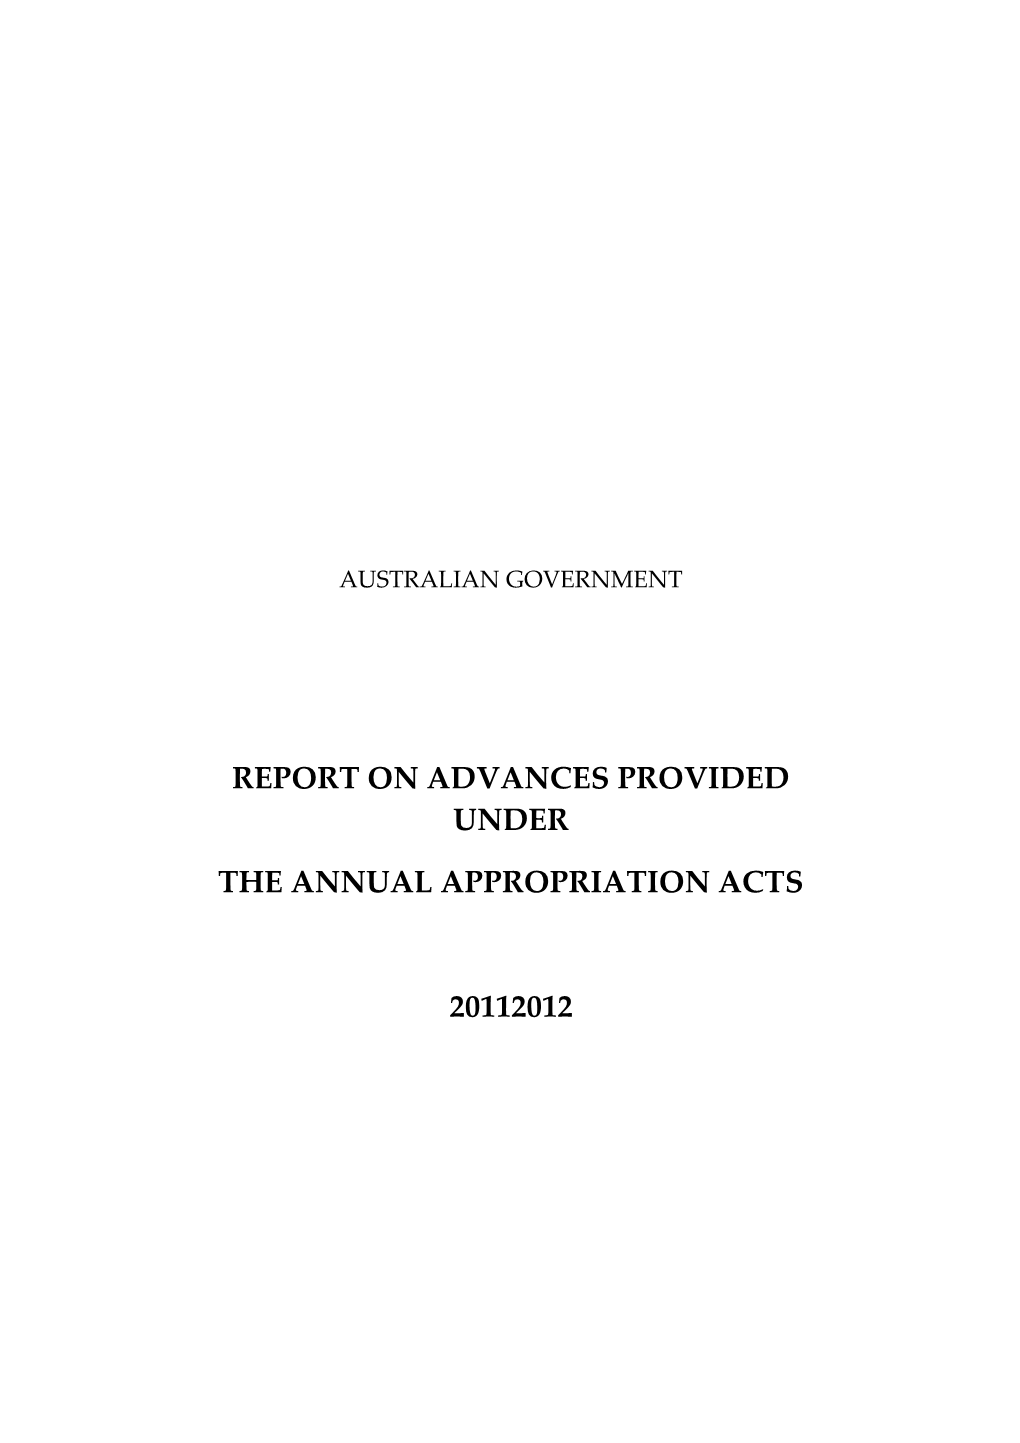 Report on Advances Provided Under the Annual Appropriation Acts 2011-2012